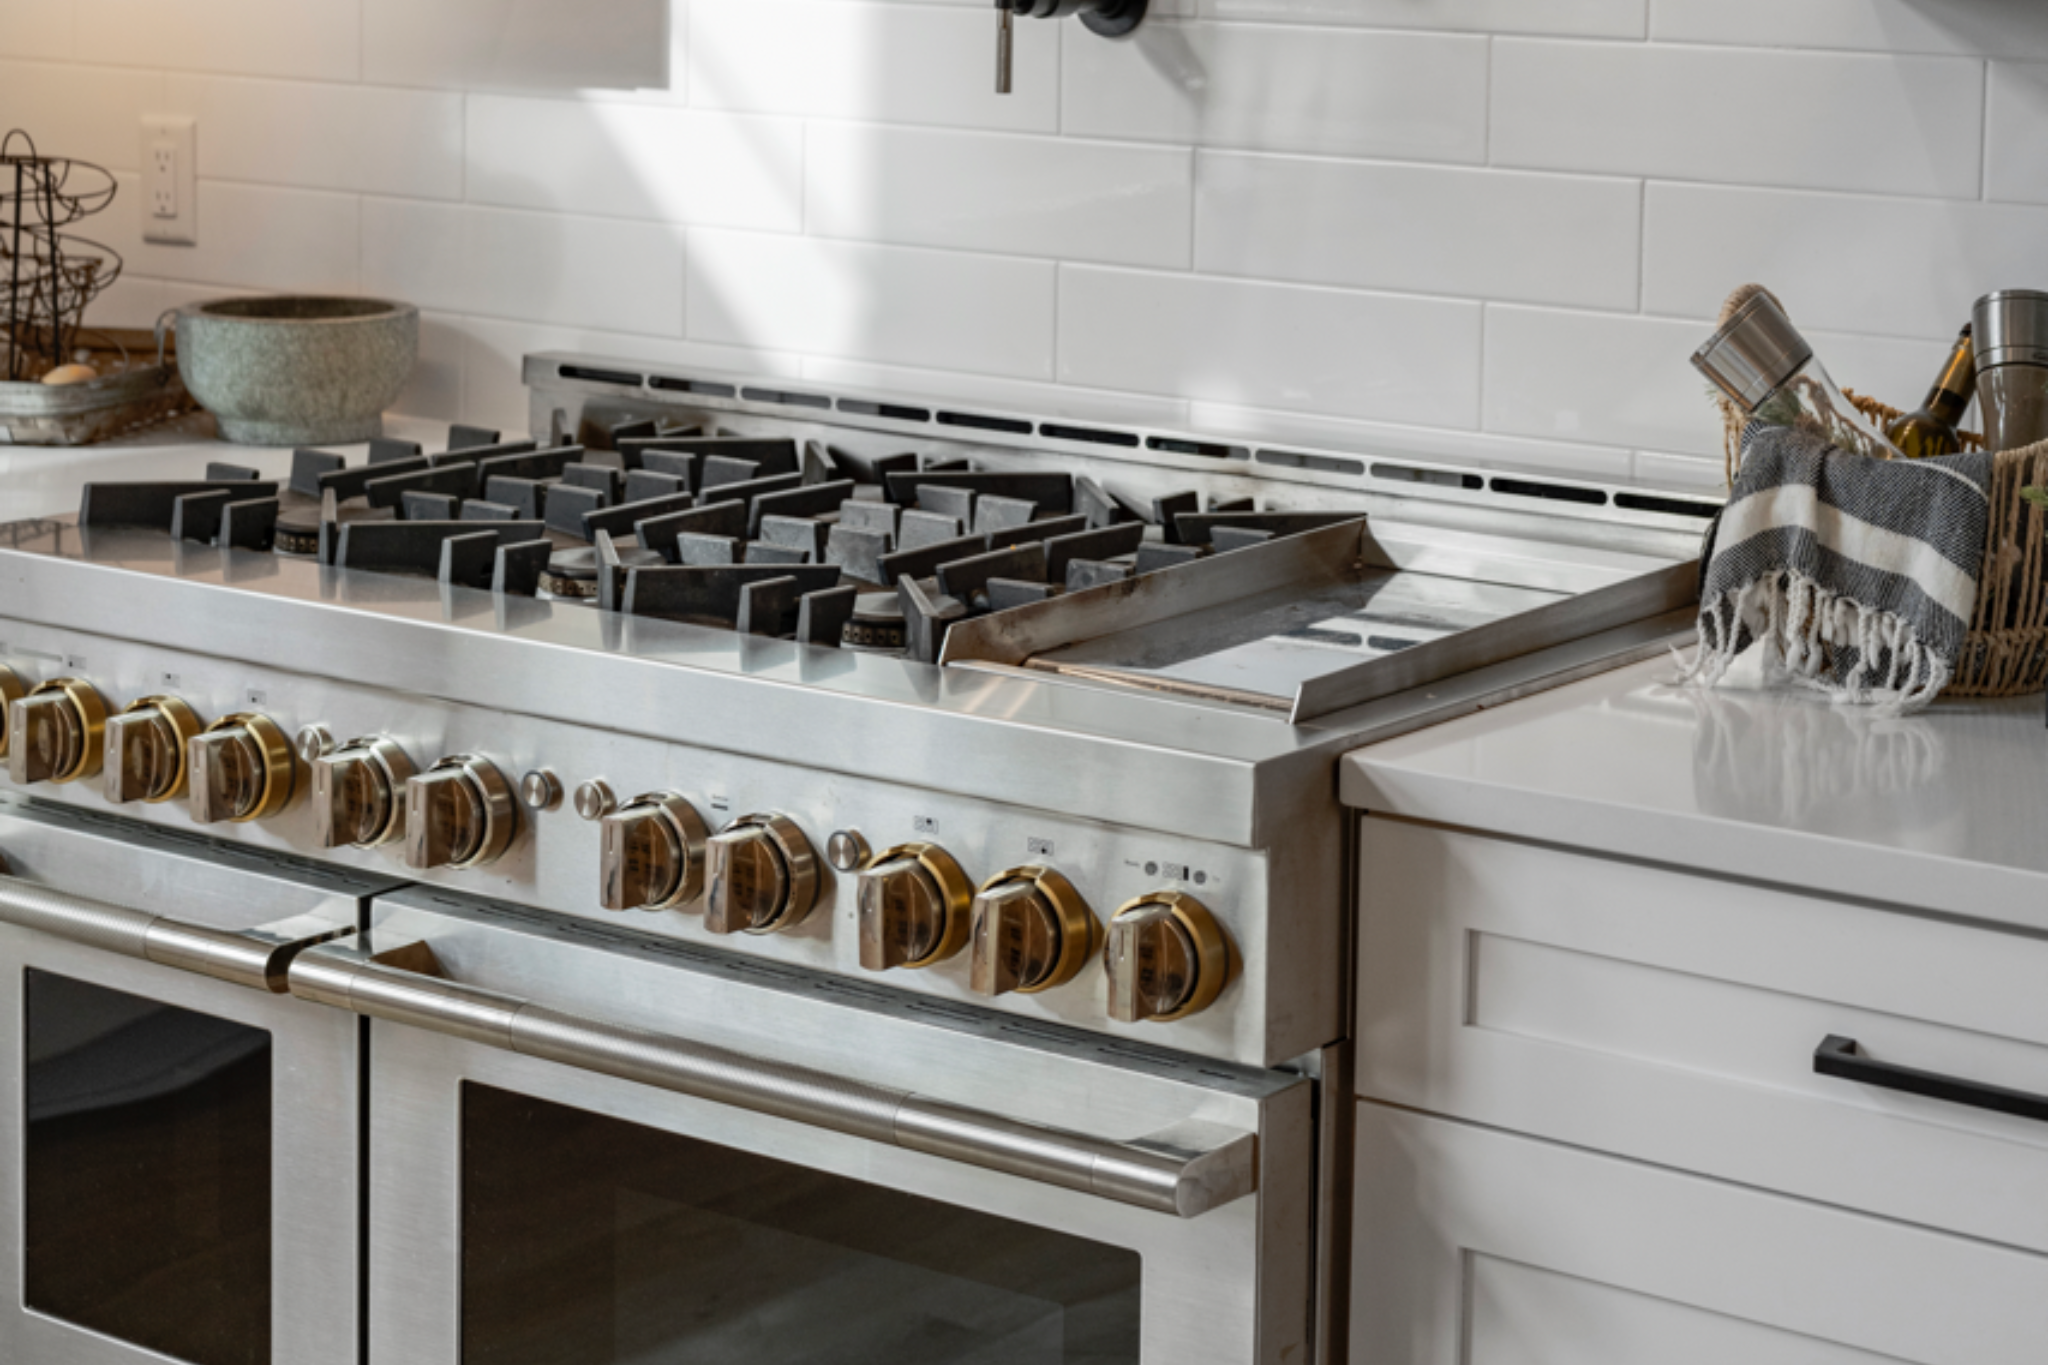 Stainless steel range with marble countertops, highlighting one of the best countertop materials for kitchens.